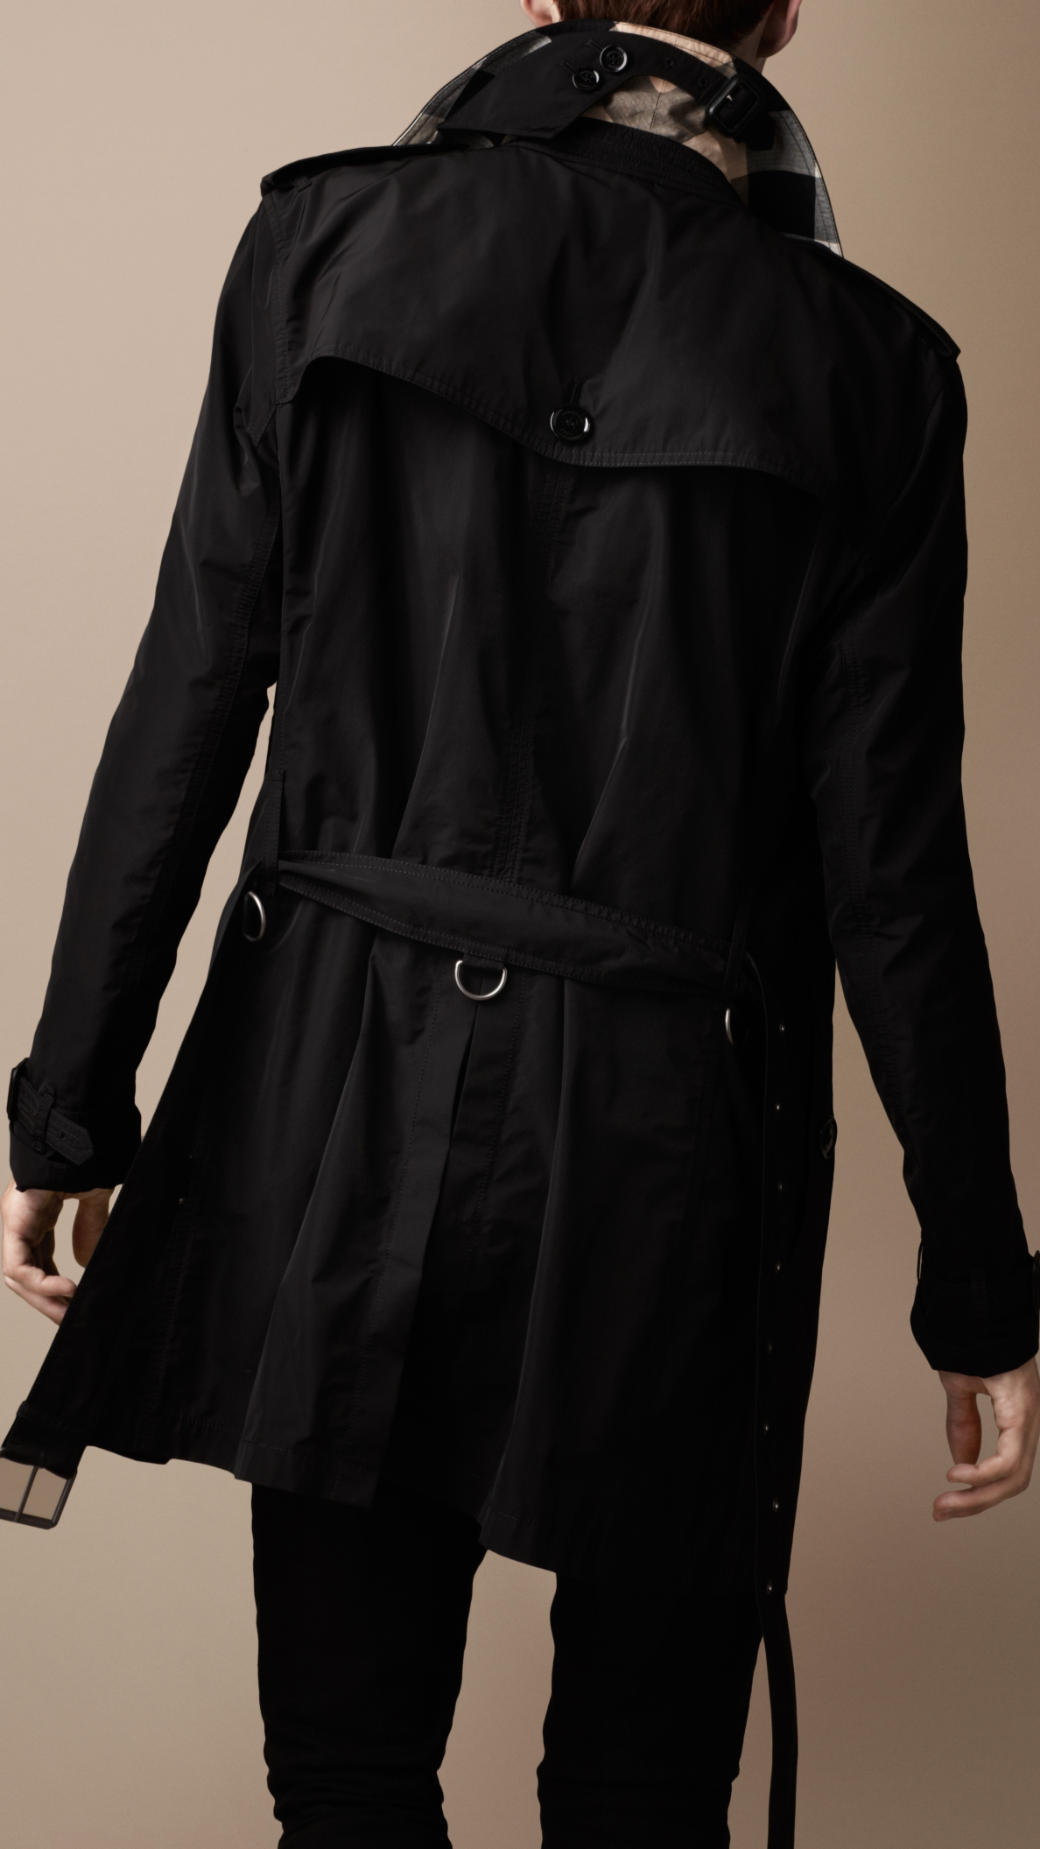 Burberry Trench Coat Men Black Clearance, 58% OFF | www.atv.si